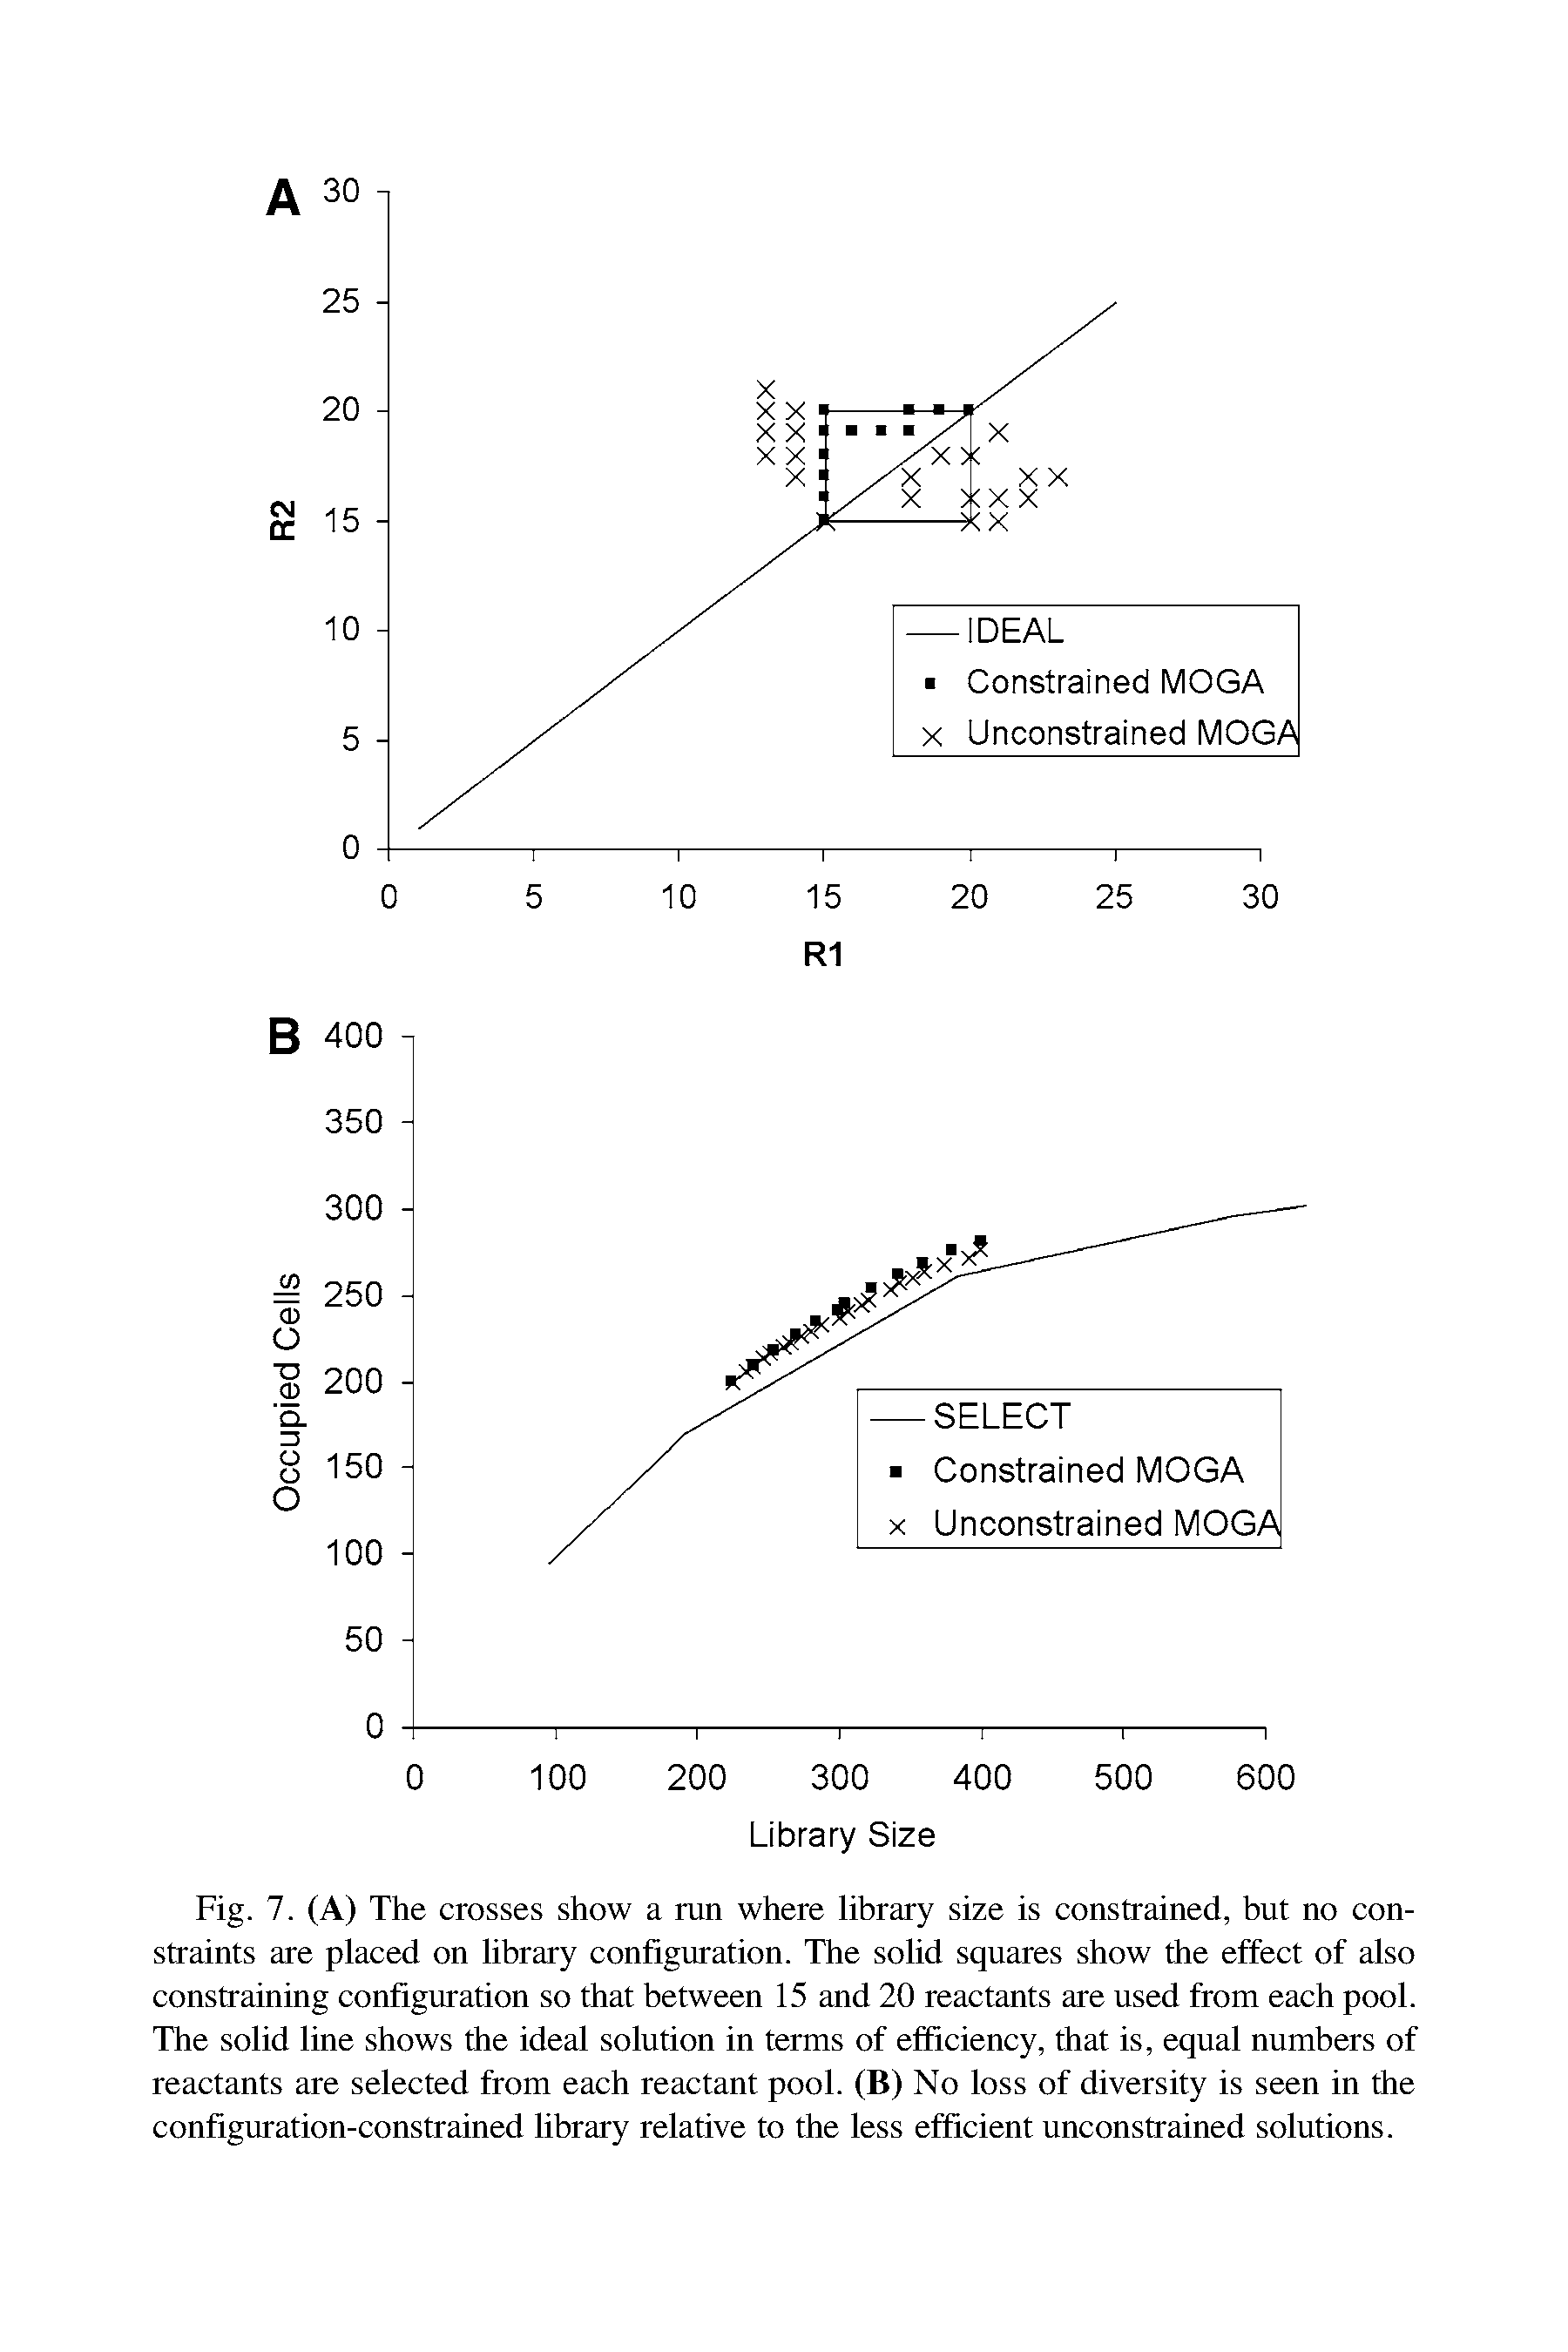 Fig. 7. (A) The crosses show a run where library size is constrained, but no constraints are placed on library configuration. The solid squares show the effect of also constraining configuration so that between 15 and 20 reactants are used from each pool. The solid line shows the ideal solution in terms of efficiency, that is, equal numbers of reactants are selected from each reactant pool. (B) No loss of diversity is seen in the configuration-constrained library relative to the less efficient unconstrained solutions.